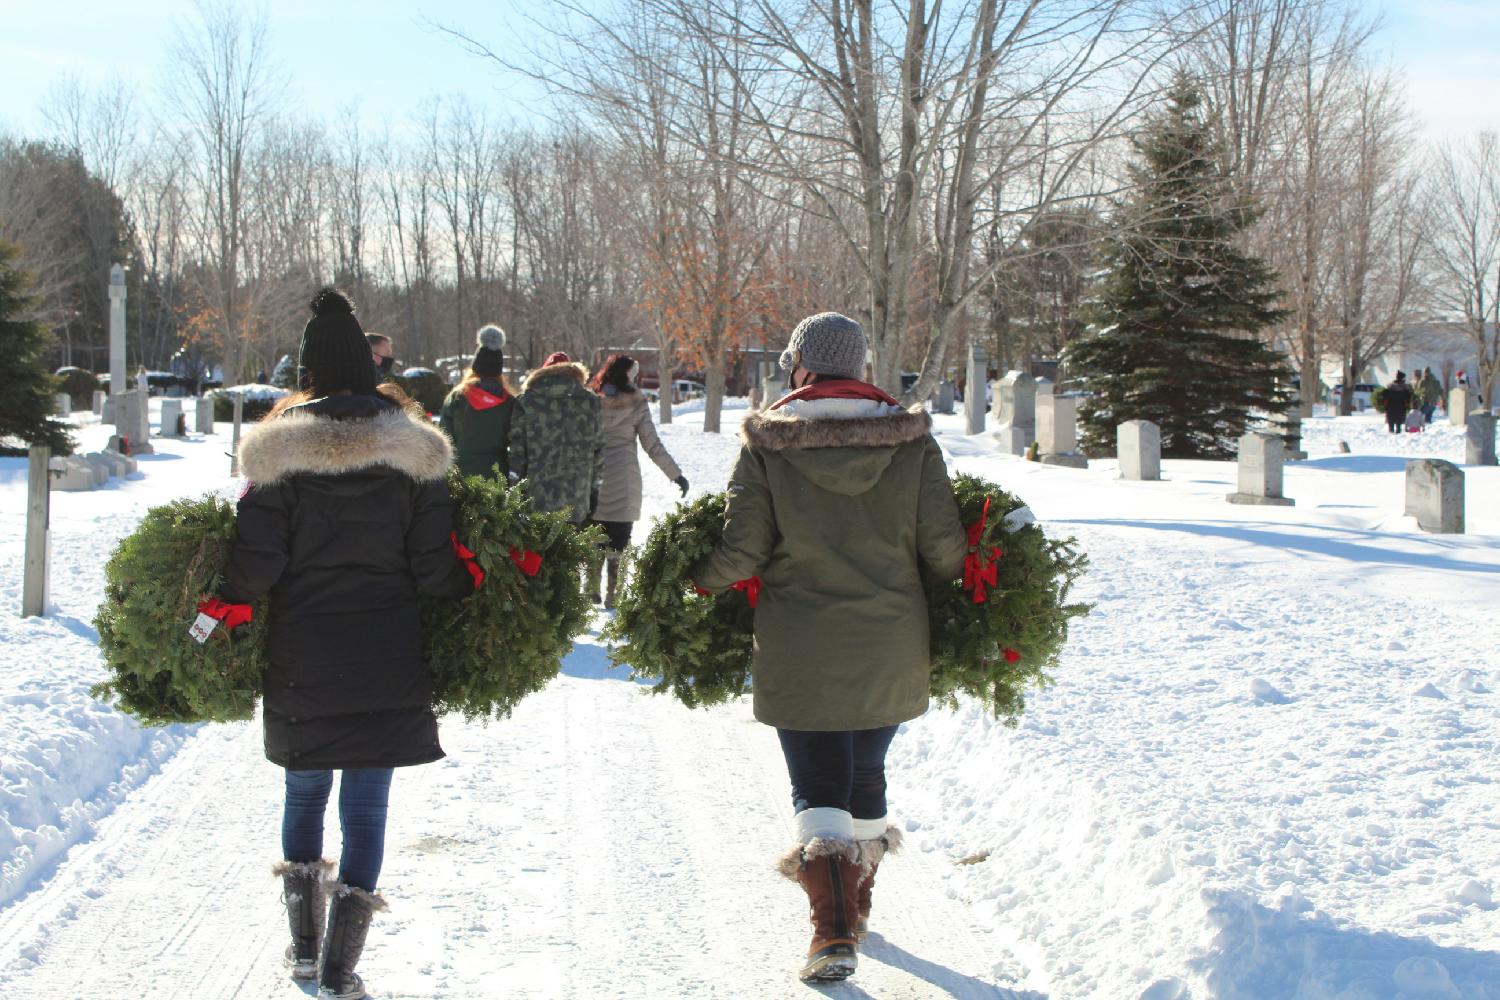 Employees participate in Wreaths Across America event in Biddeford, Maine laying 3,000 wreaths on the graves of veterans